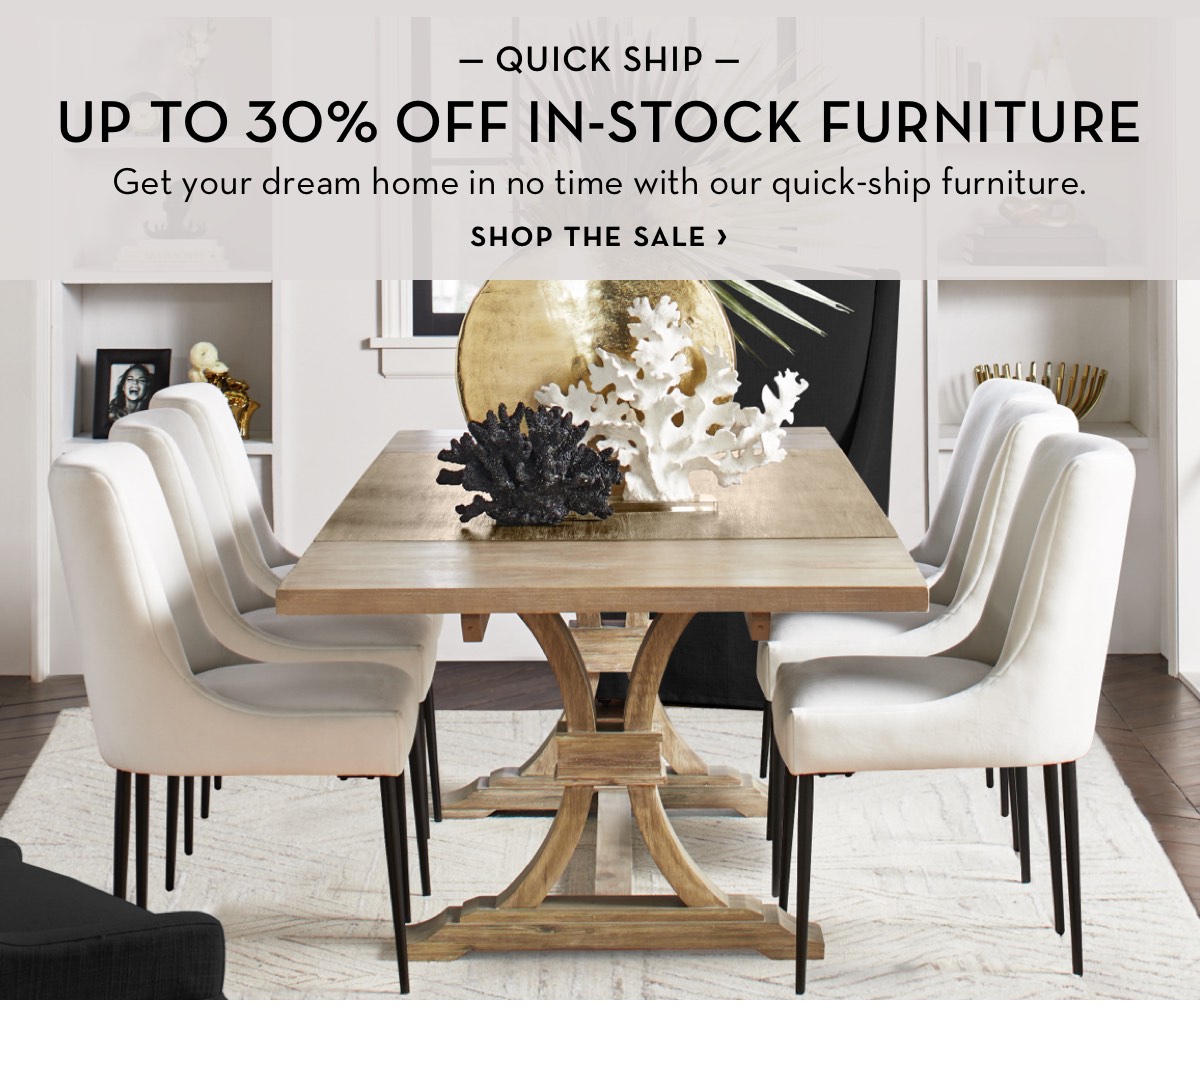  QUICK SHIP UP TO 30% OFF IN-STOCK FURNITURE Get your dream home in no time with our quick-ship furniture. SHOP THE SALE 